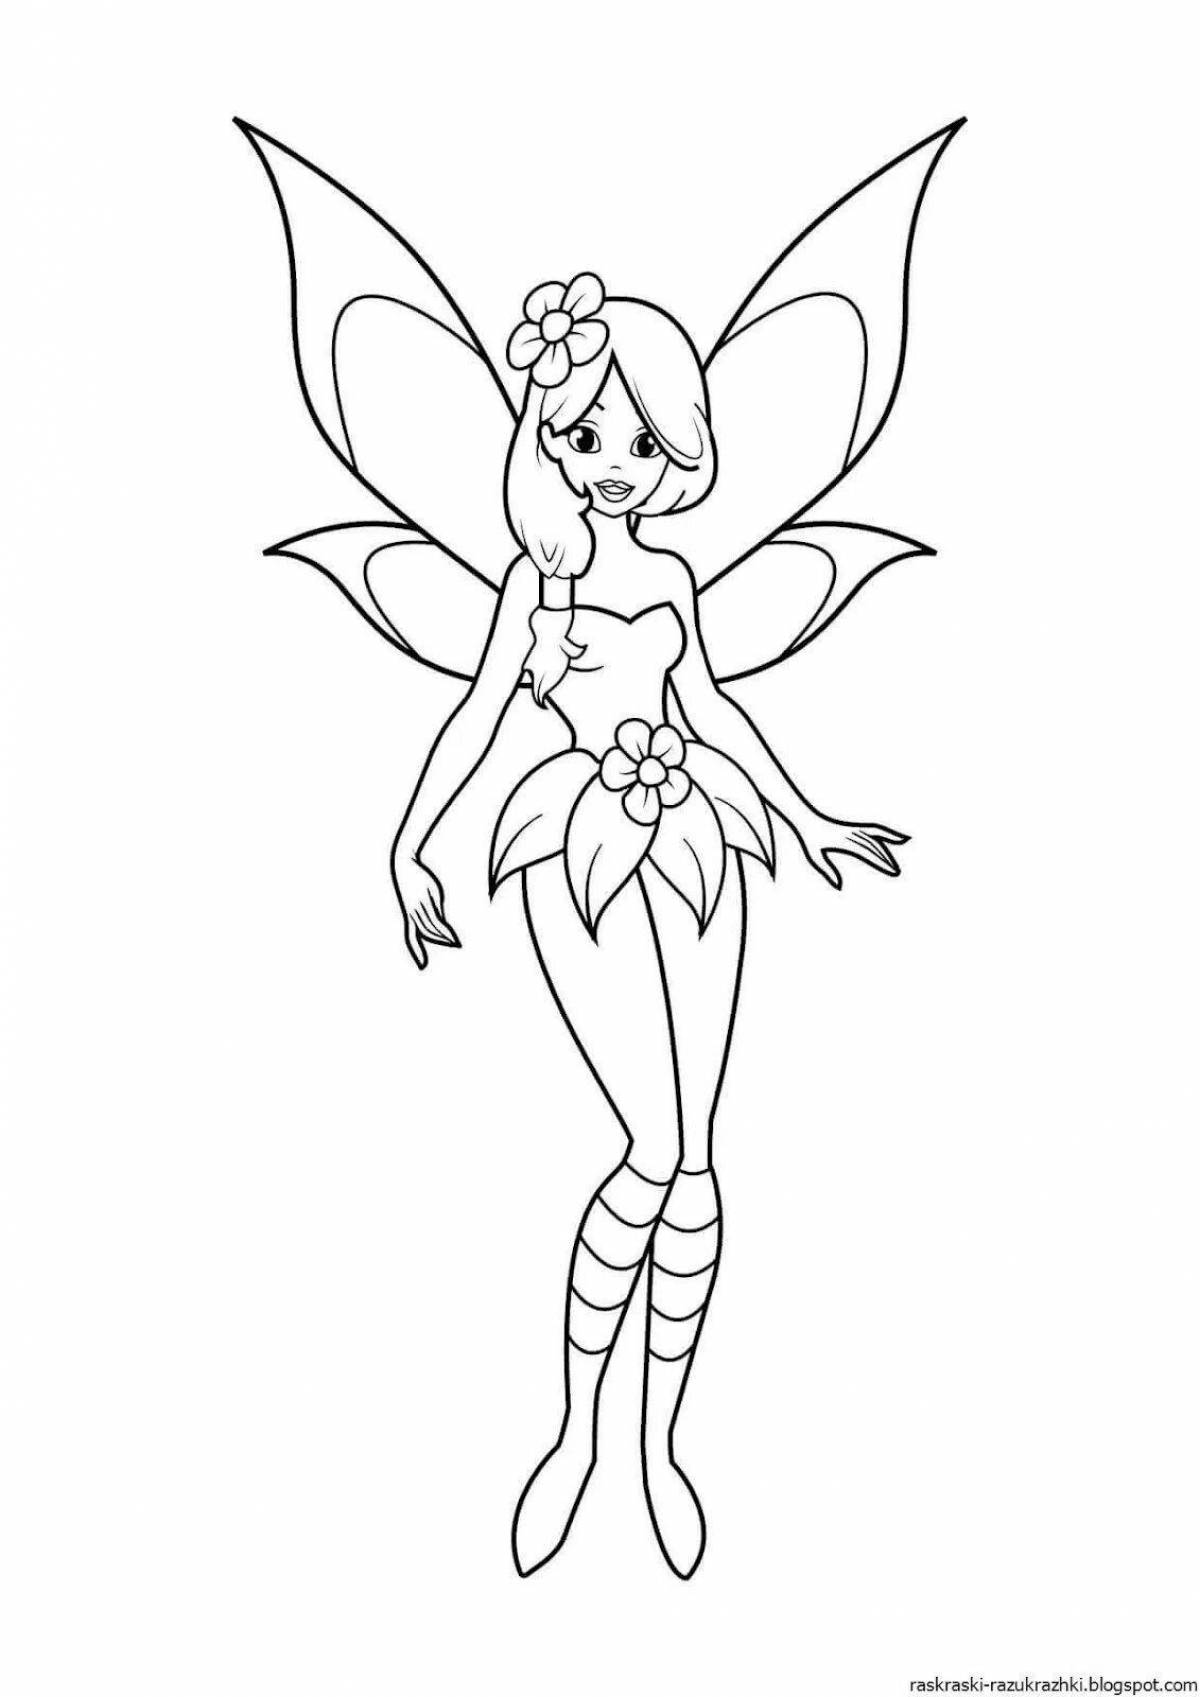 Coloring page energetic little fairy